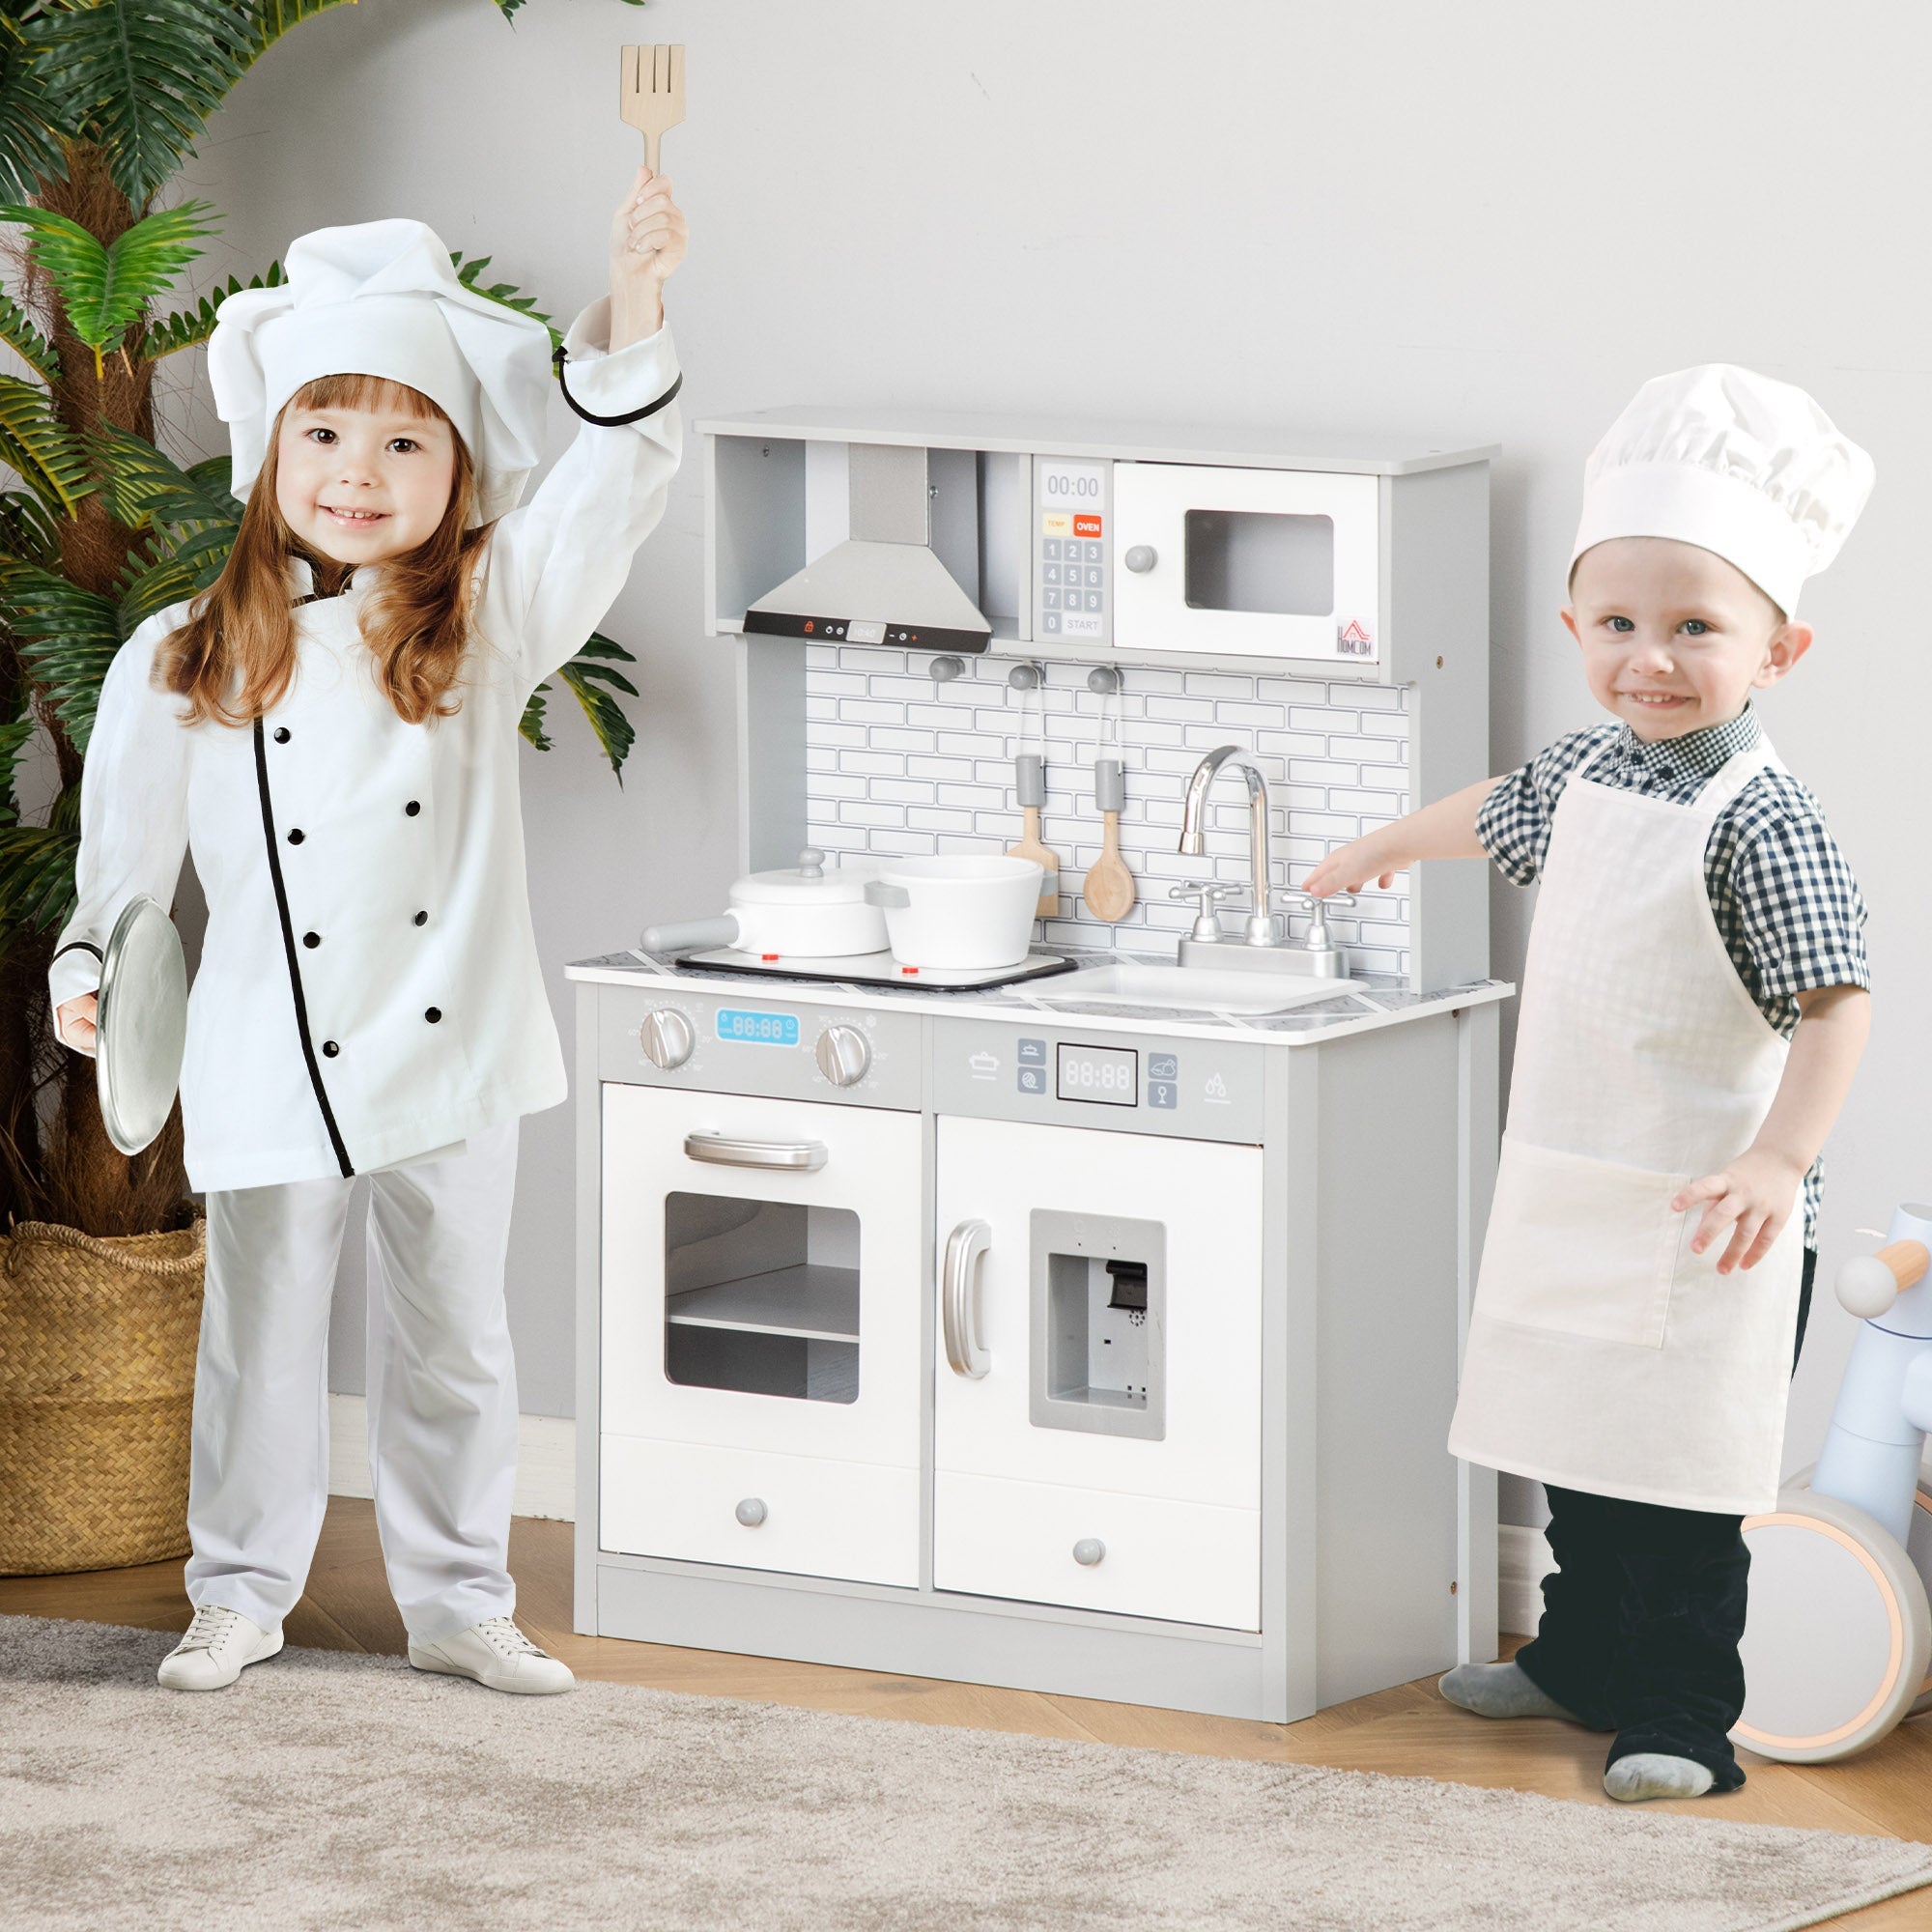 Kids Kitchen Play Cooking Toy Set w/ Sound & Light - for 3-6 Years Old - Grey - HOMCOM  | TJ Hughes